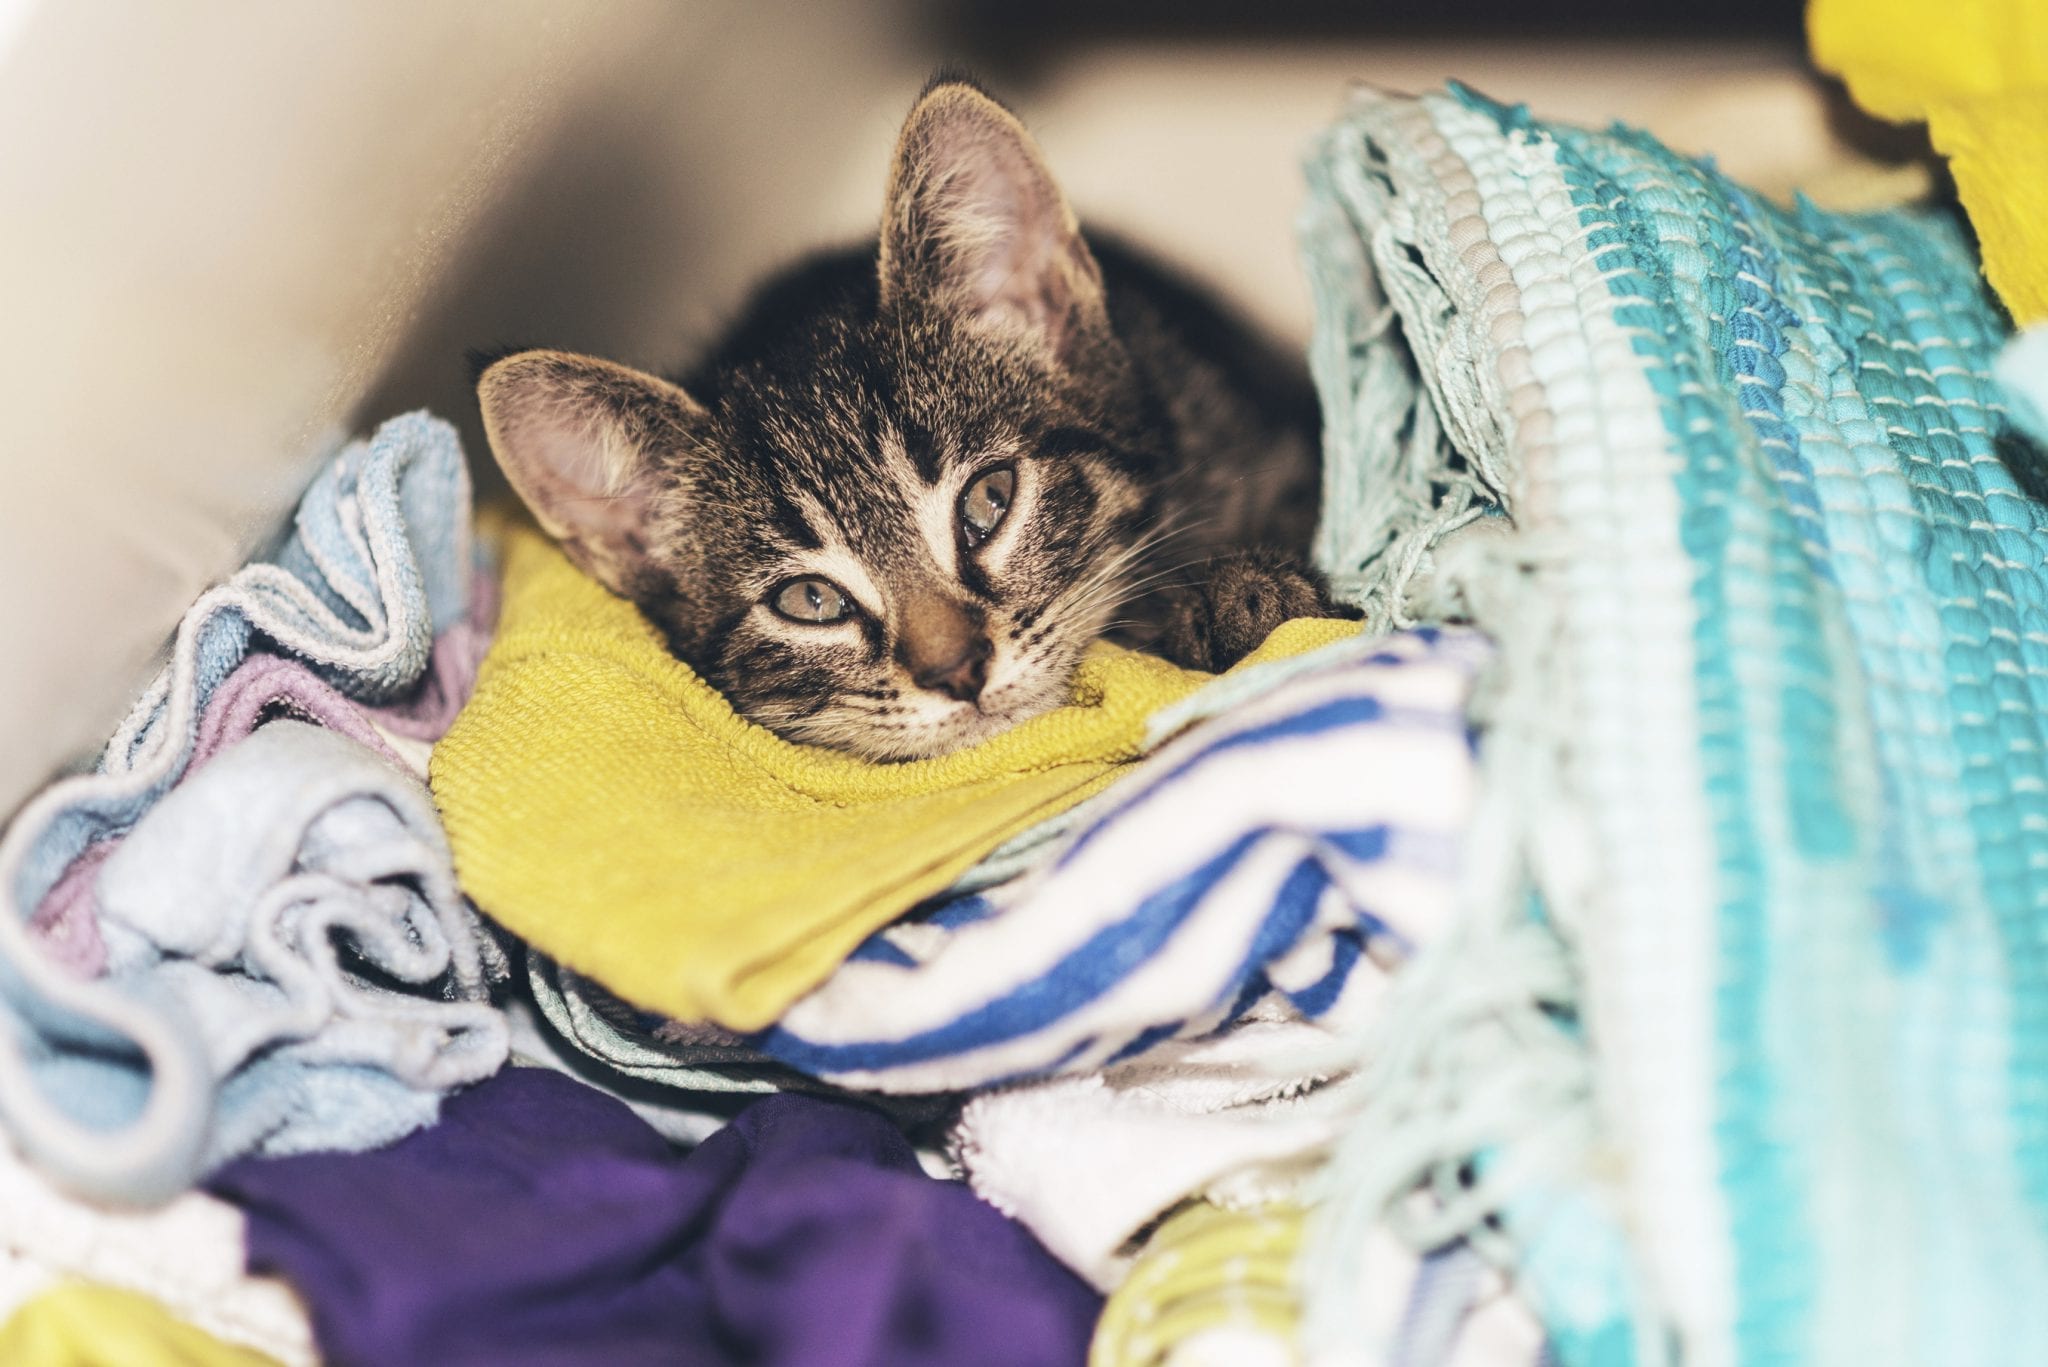 How to Remove Unwanted Pet Hair from Laundry